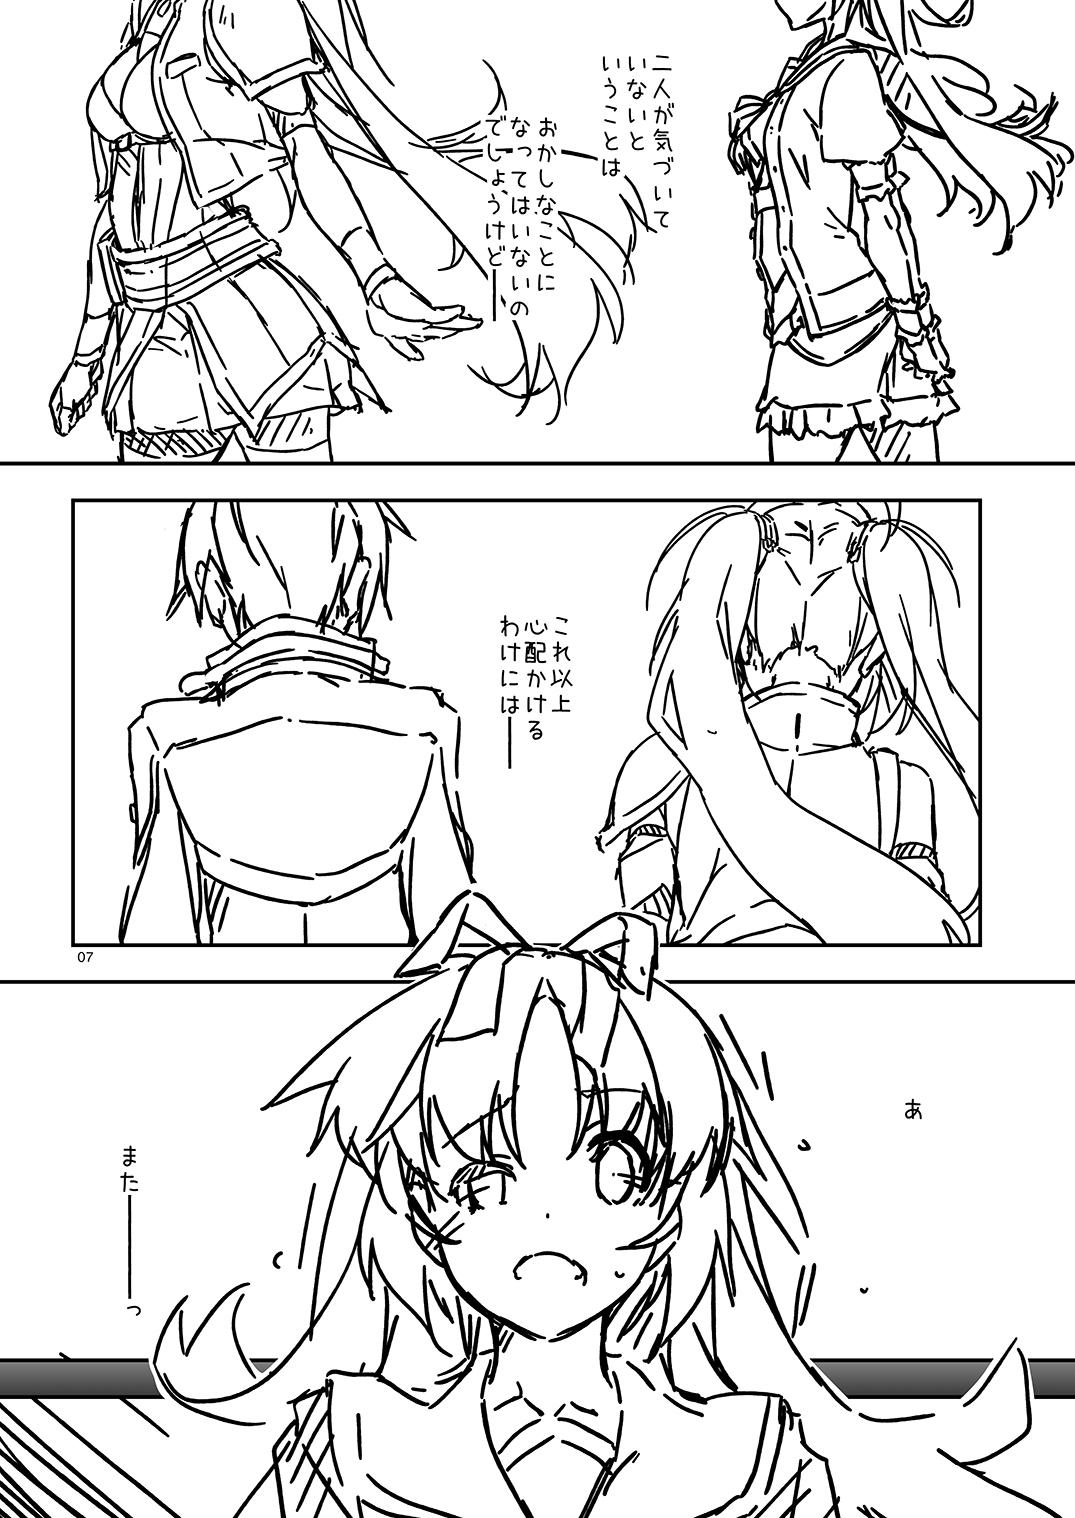 Blow Job Contest Extra72 - Sword art online The legend of heroes | eiyuu densetsu And - Page 7